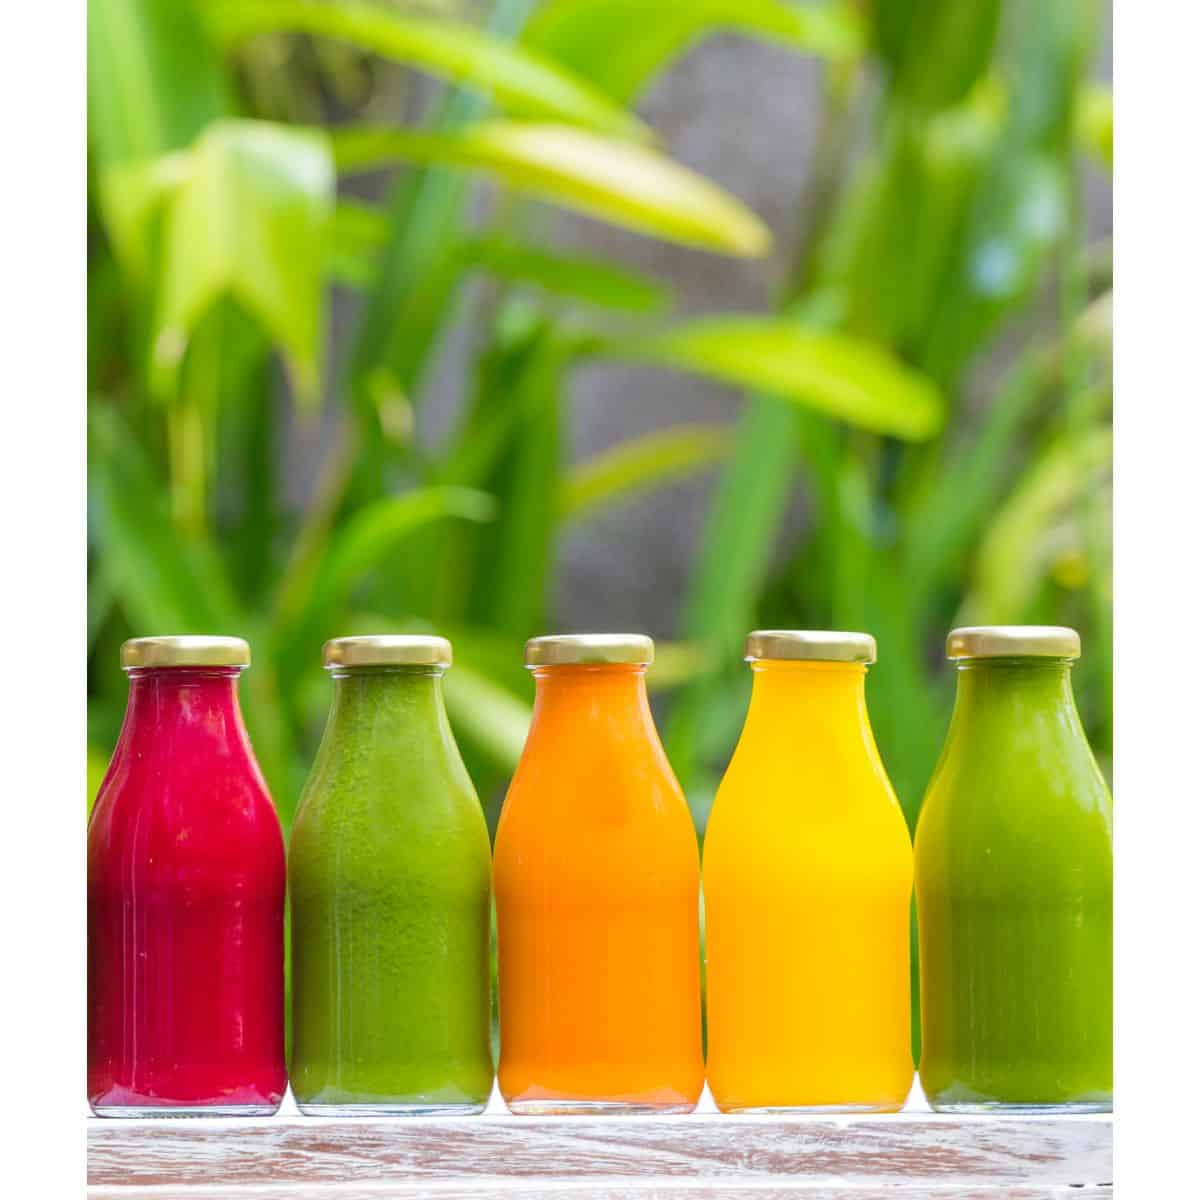 5 glass jars of juice in a row; red, light green, orange, yellow, and dark green with plants in the background